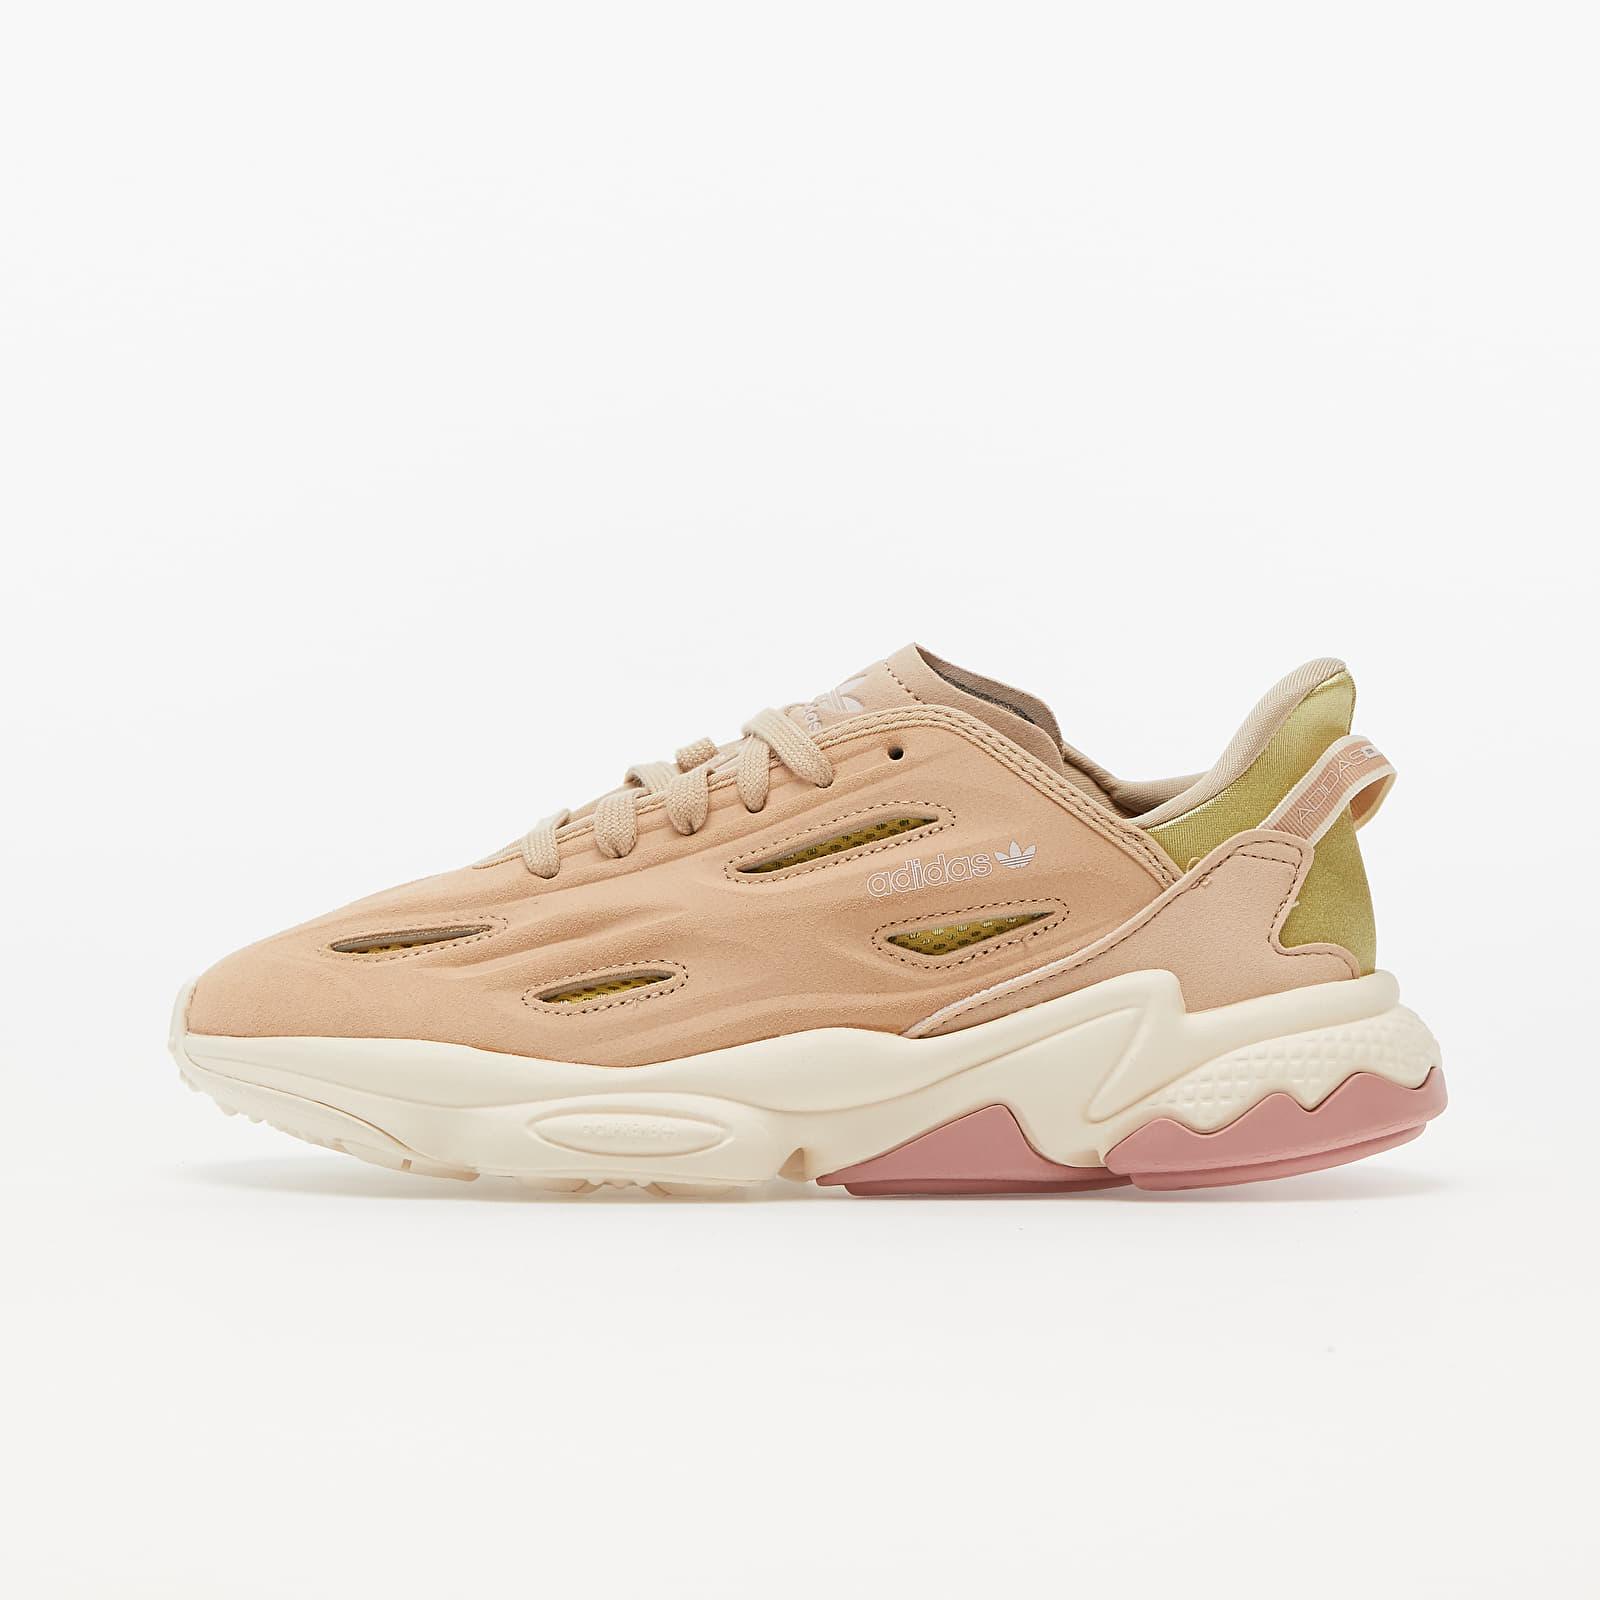 Ozweego Adidas Clear St adidas Pale Lyst | Pink in Originals Worn Natural White/ W Celox Nude/